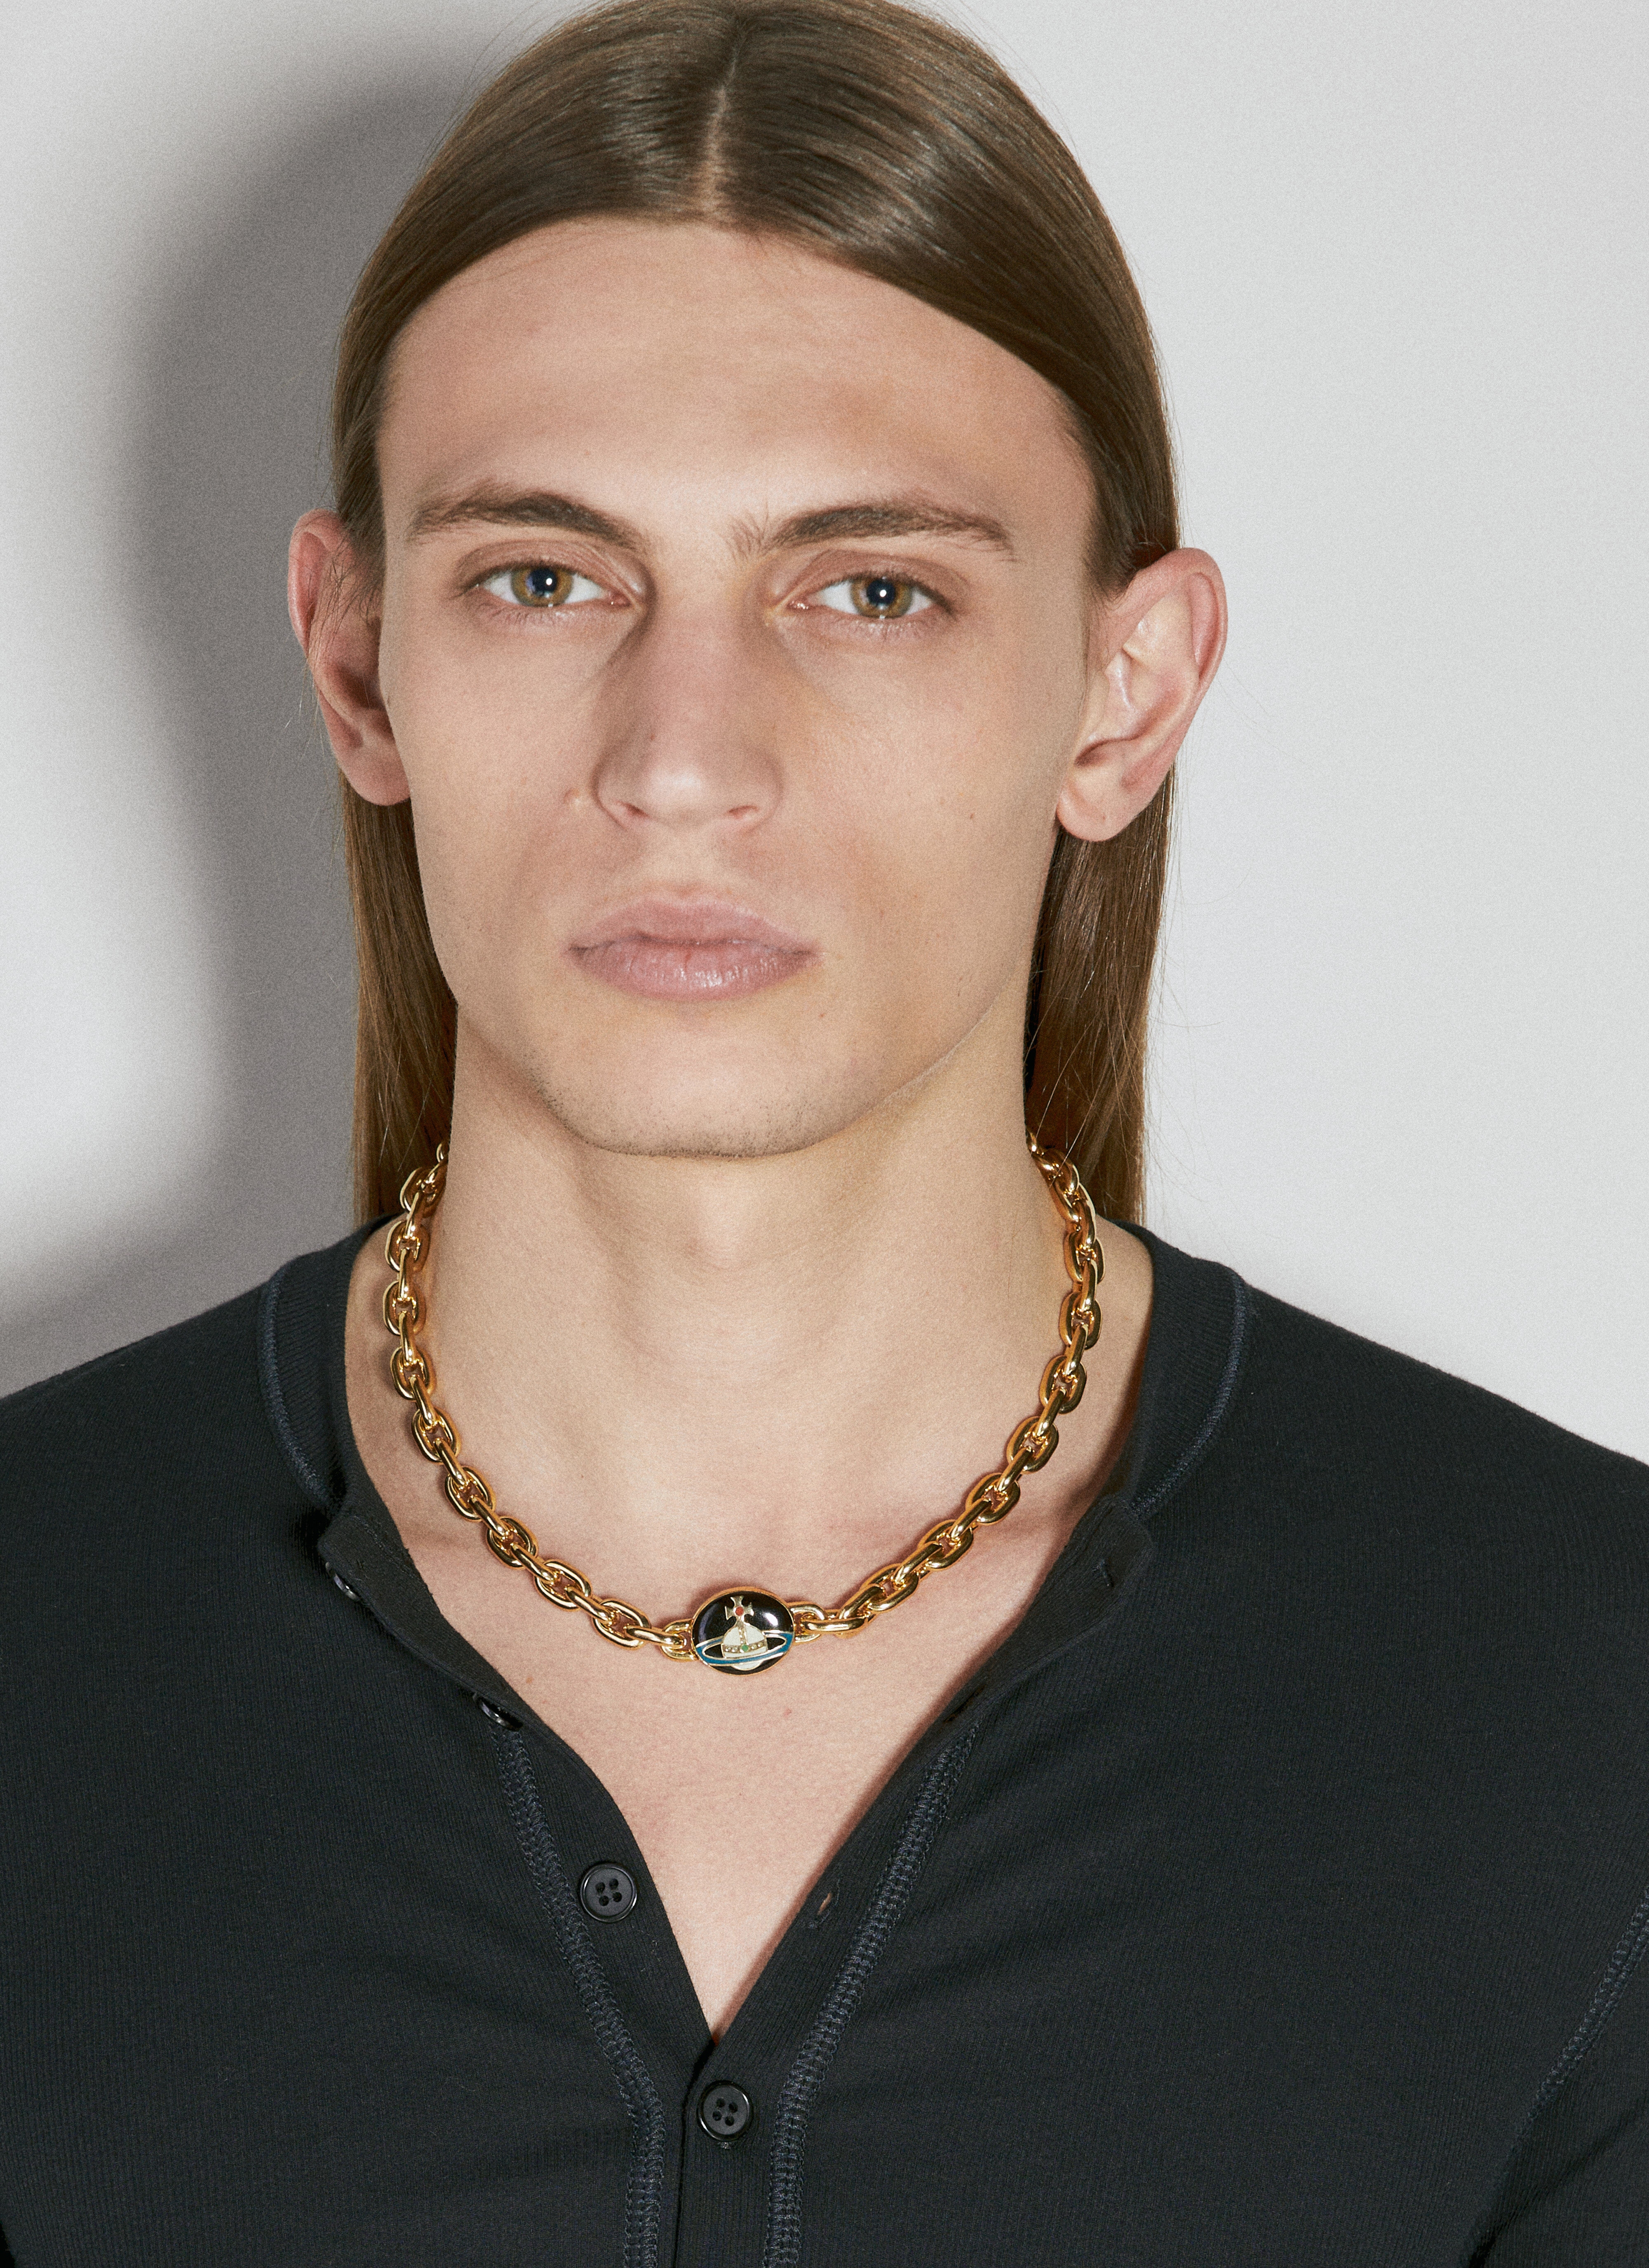 Planet Necklace Designer Viviennewestwood Necklace Vivians Same Orb  Stereoscopic Planet Necklace For Men And Womens Style Ornaments Small And  Luxury Collar Chain From Jxl003jewelry, $24.78 | DHgate.Com